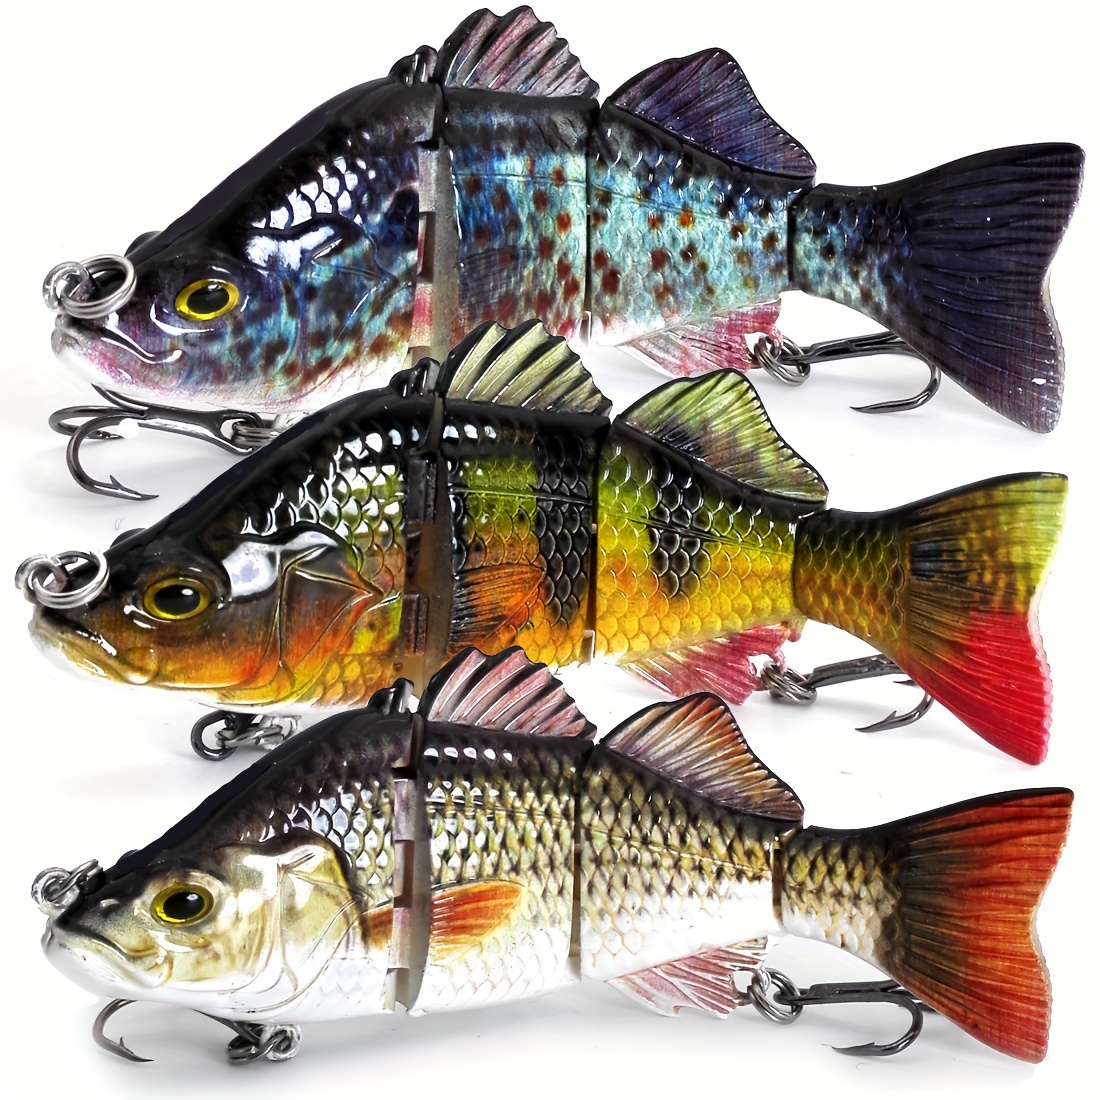 Lifelike Lure Bait Fishing Lures For Bass Trout Perch Jointed Swimbait Hard Bait  Freshwater – the best products in the Joom Geek online store